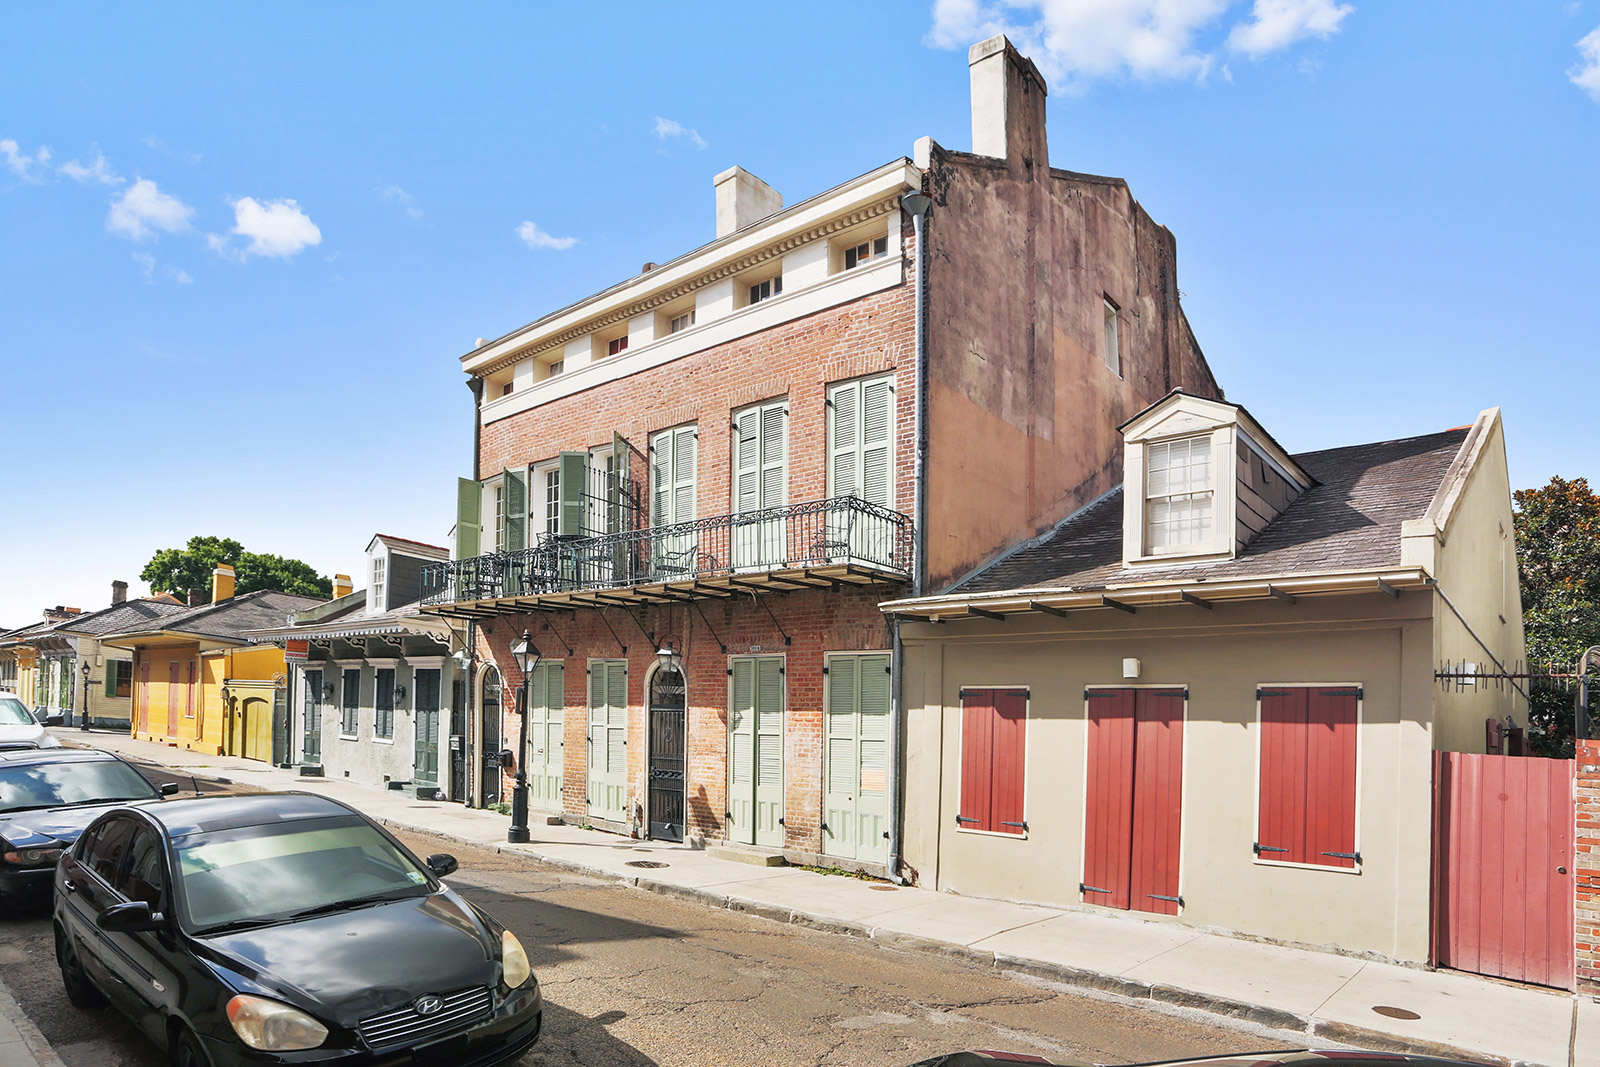 Today’s Vieux Carré, also known as the French Quarter, is home to more than 4,000 residents, many of whom walk to work in the neighborhood or in the nearby Central Business District.